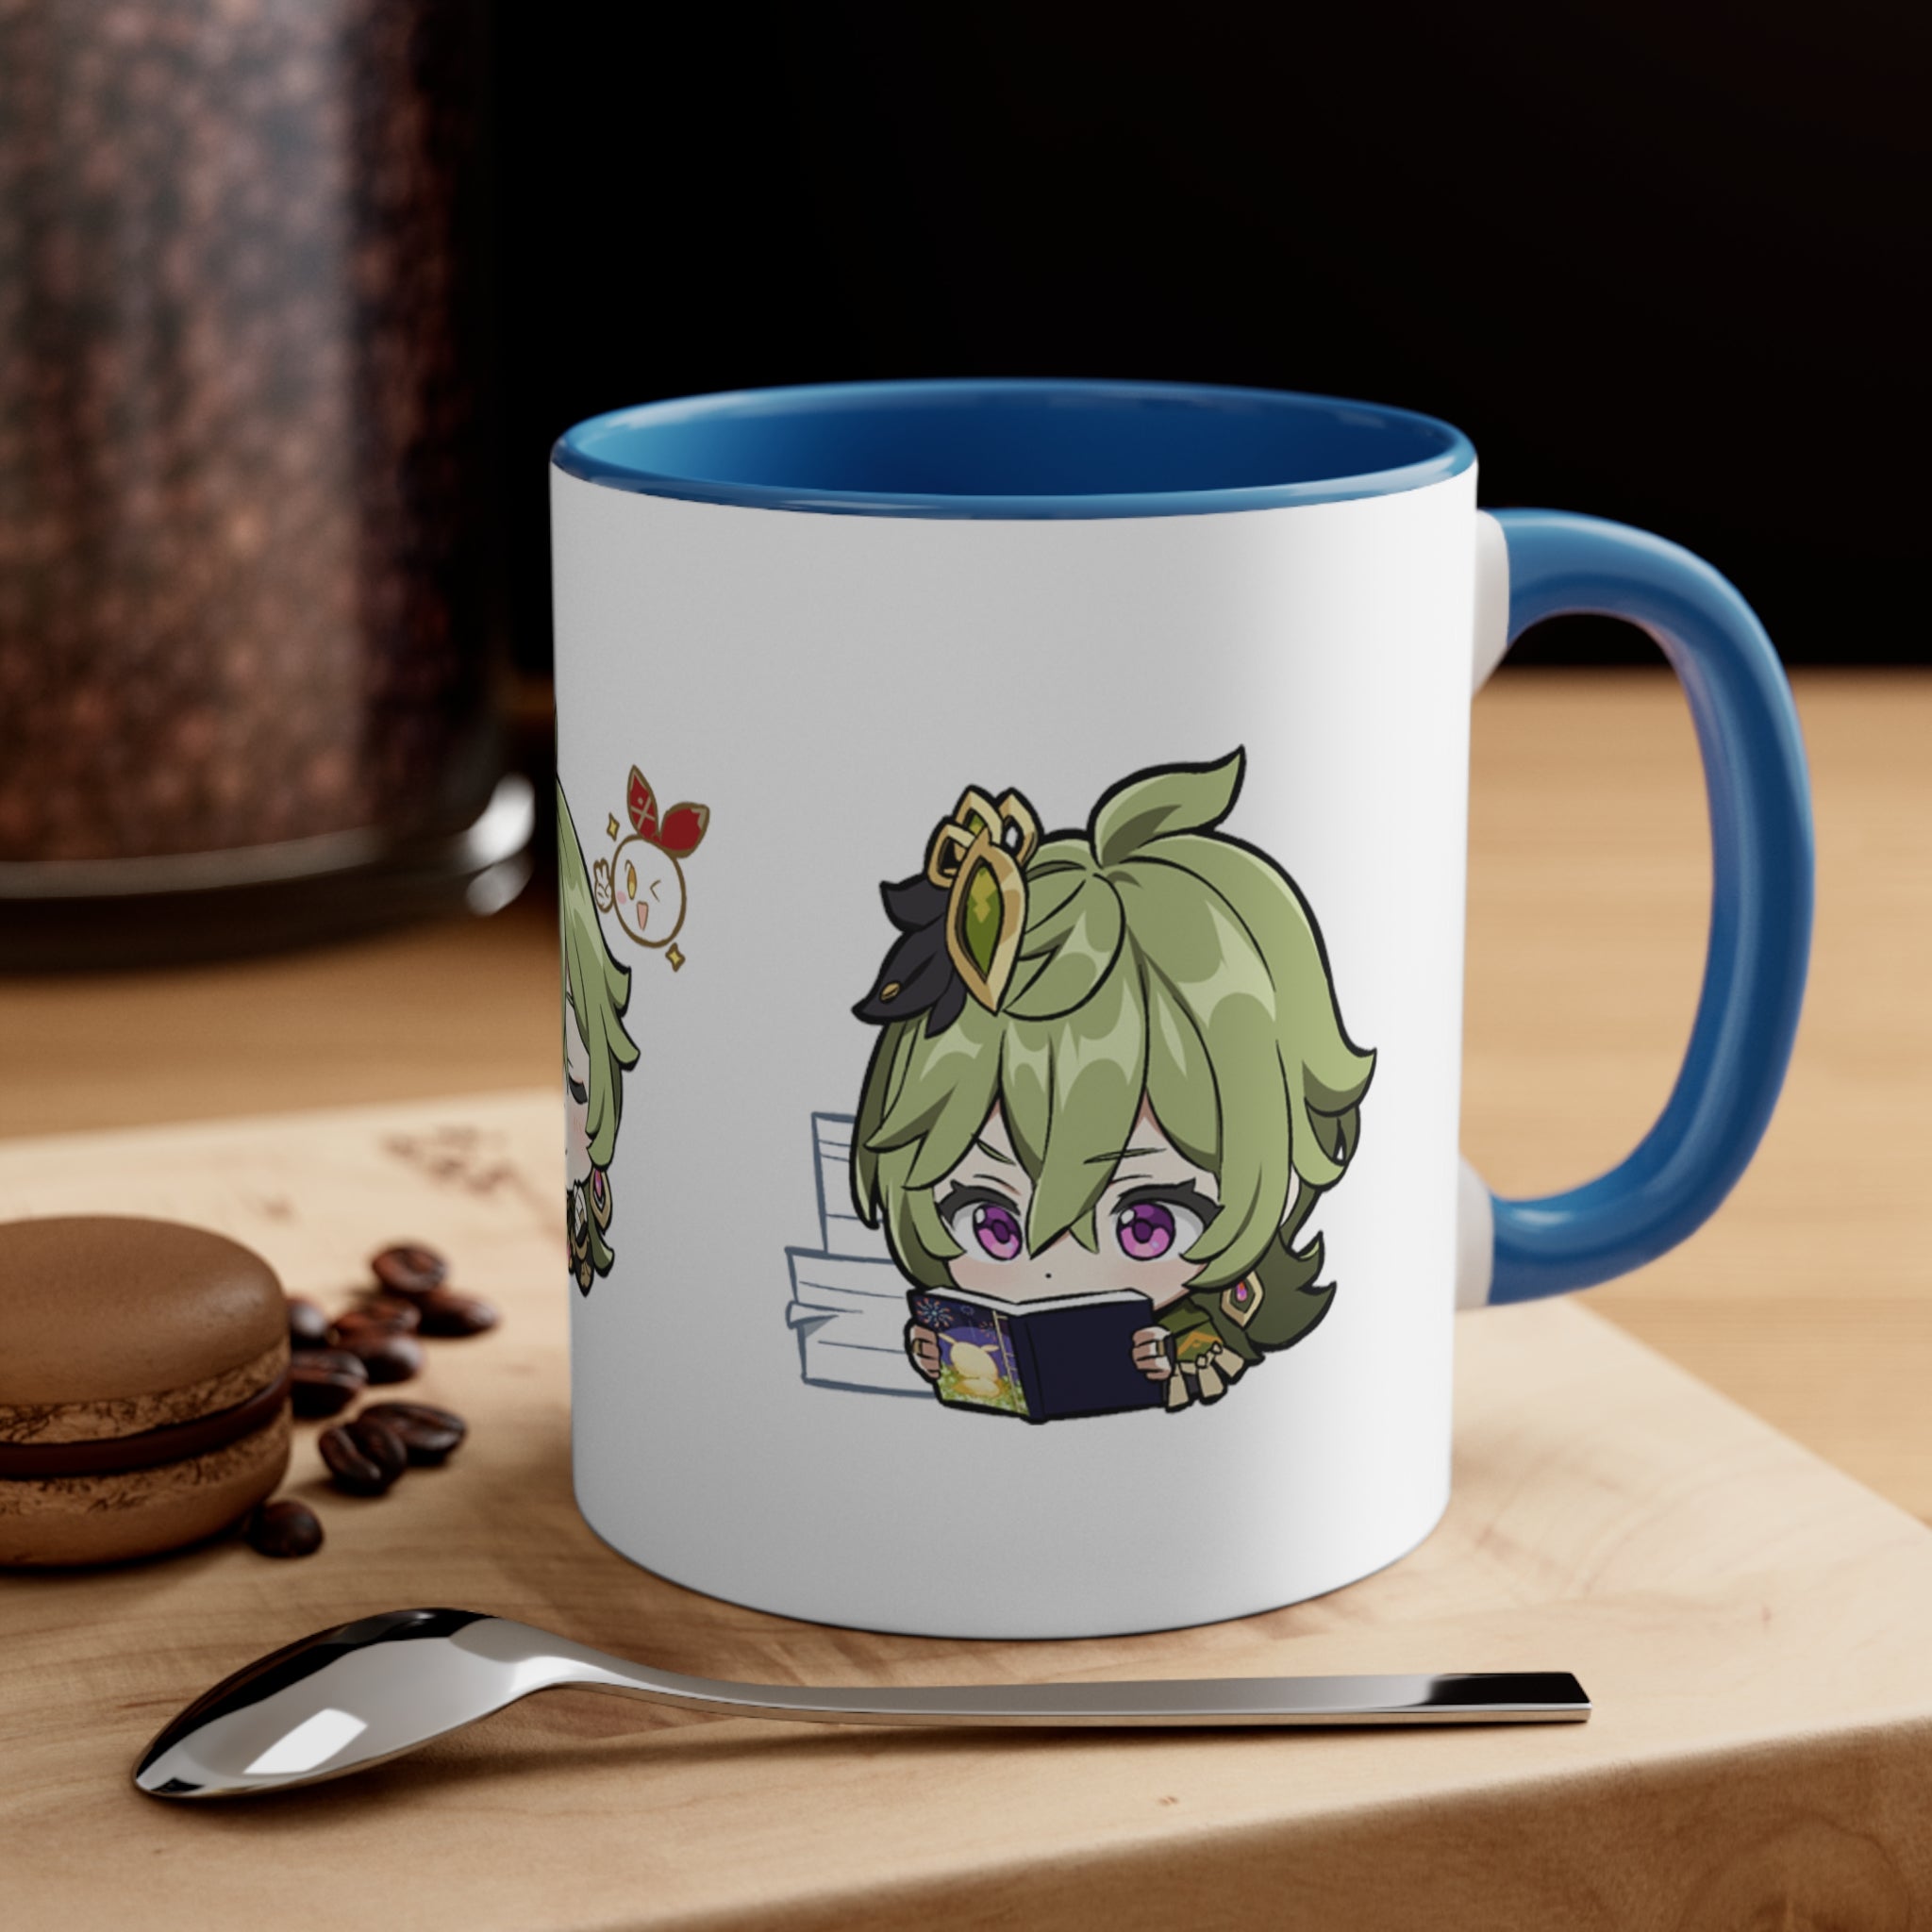 Collei Genshin Impact Accent Coffee Mug, 11oz Cups Mugs Cup Gift For Gamer Gifts Game Anime Fanart Fan Birthday Valentine's Christmas